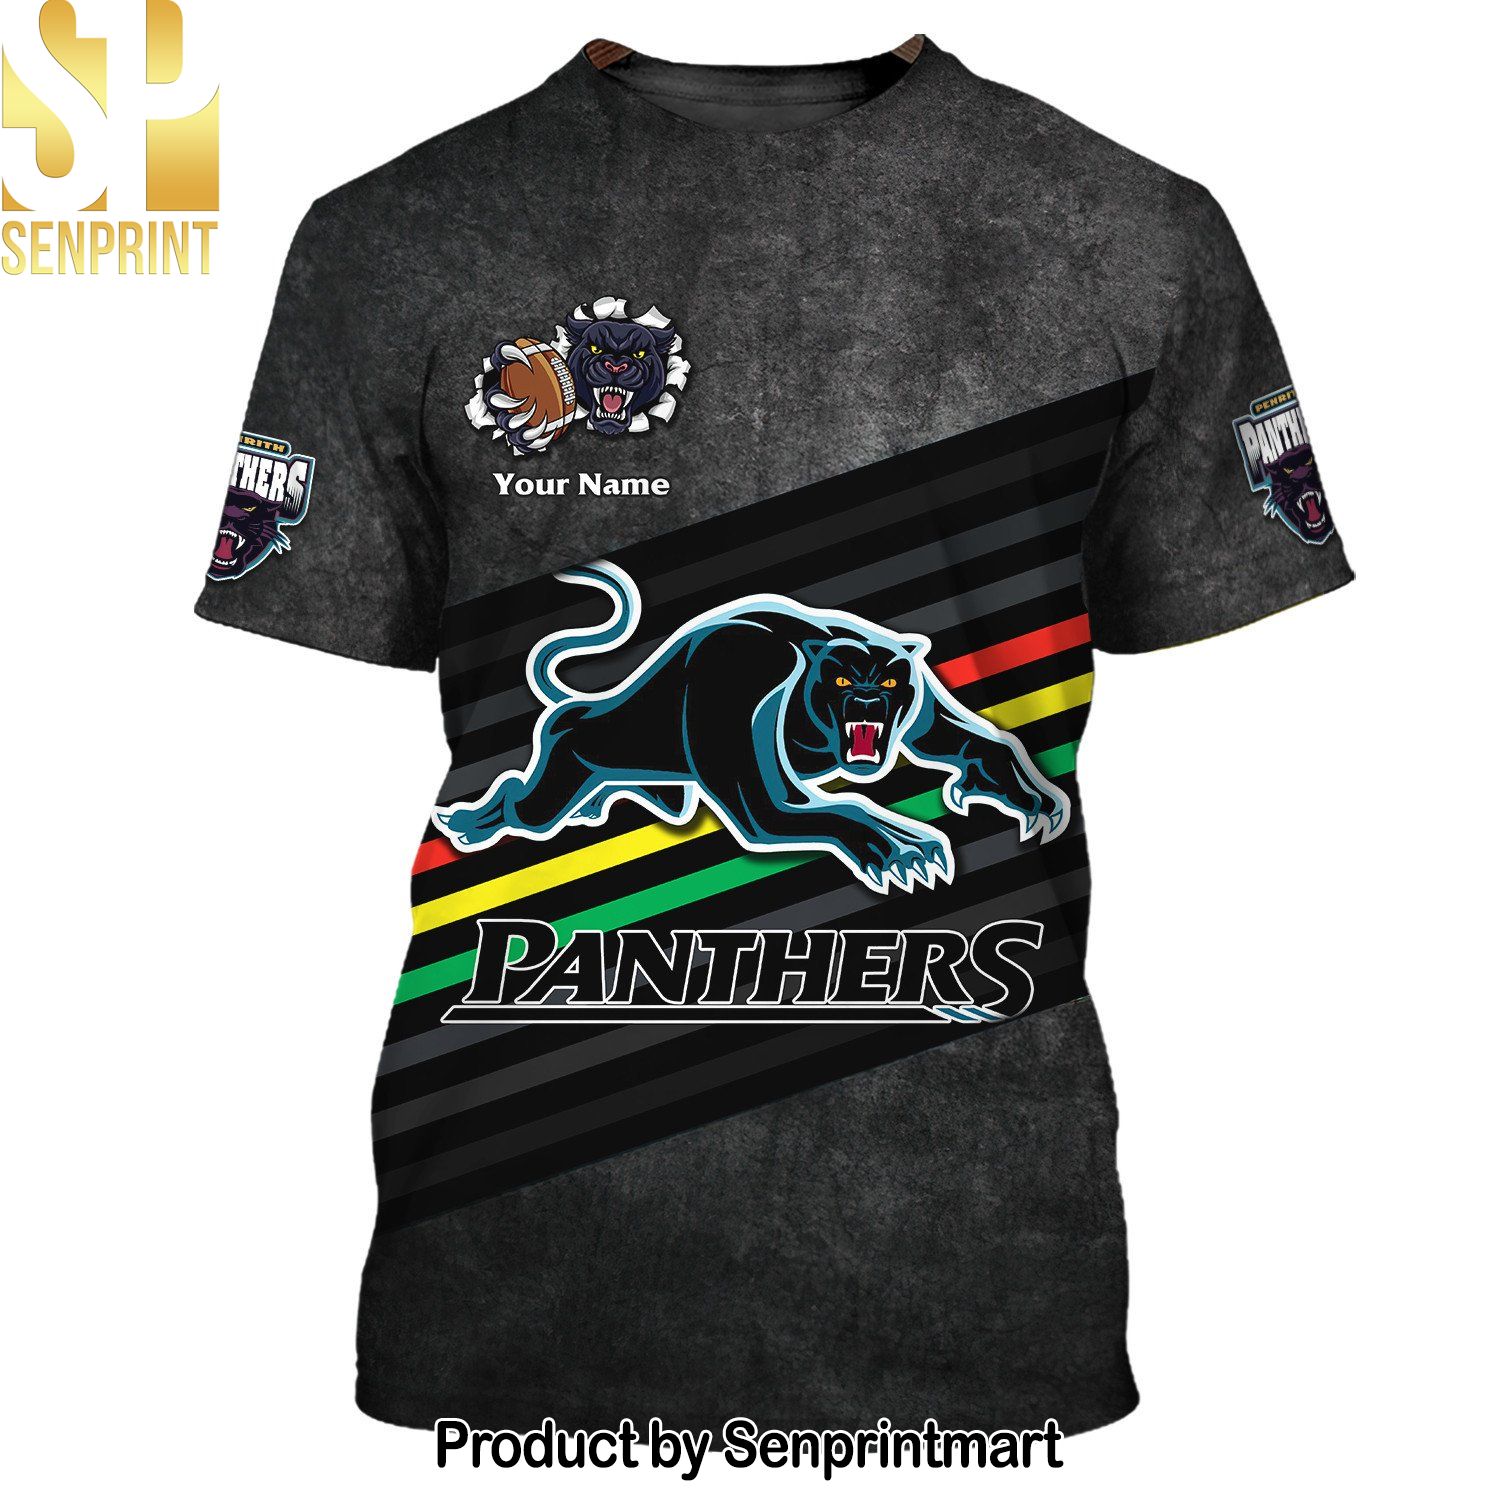 Penrith Panthers Custom Tee Panthers s Gift For NRL fan Cool Version Full Print Hawaiian Print Aloha Button Down Short Sleeve Shirt